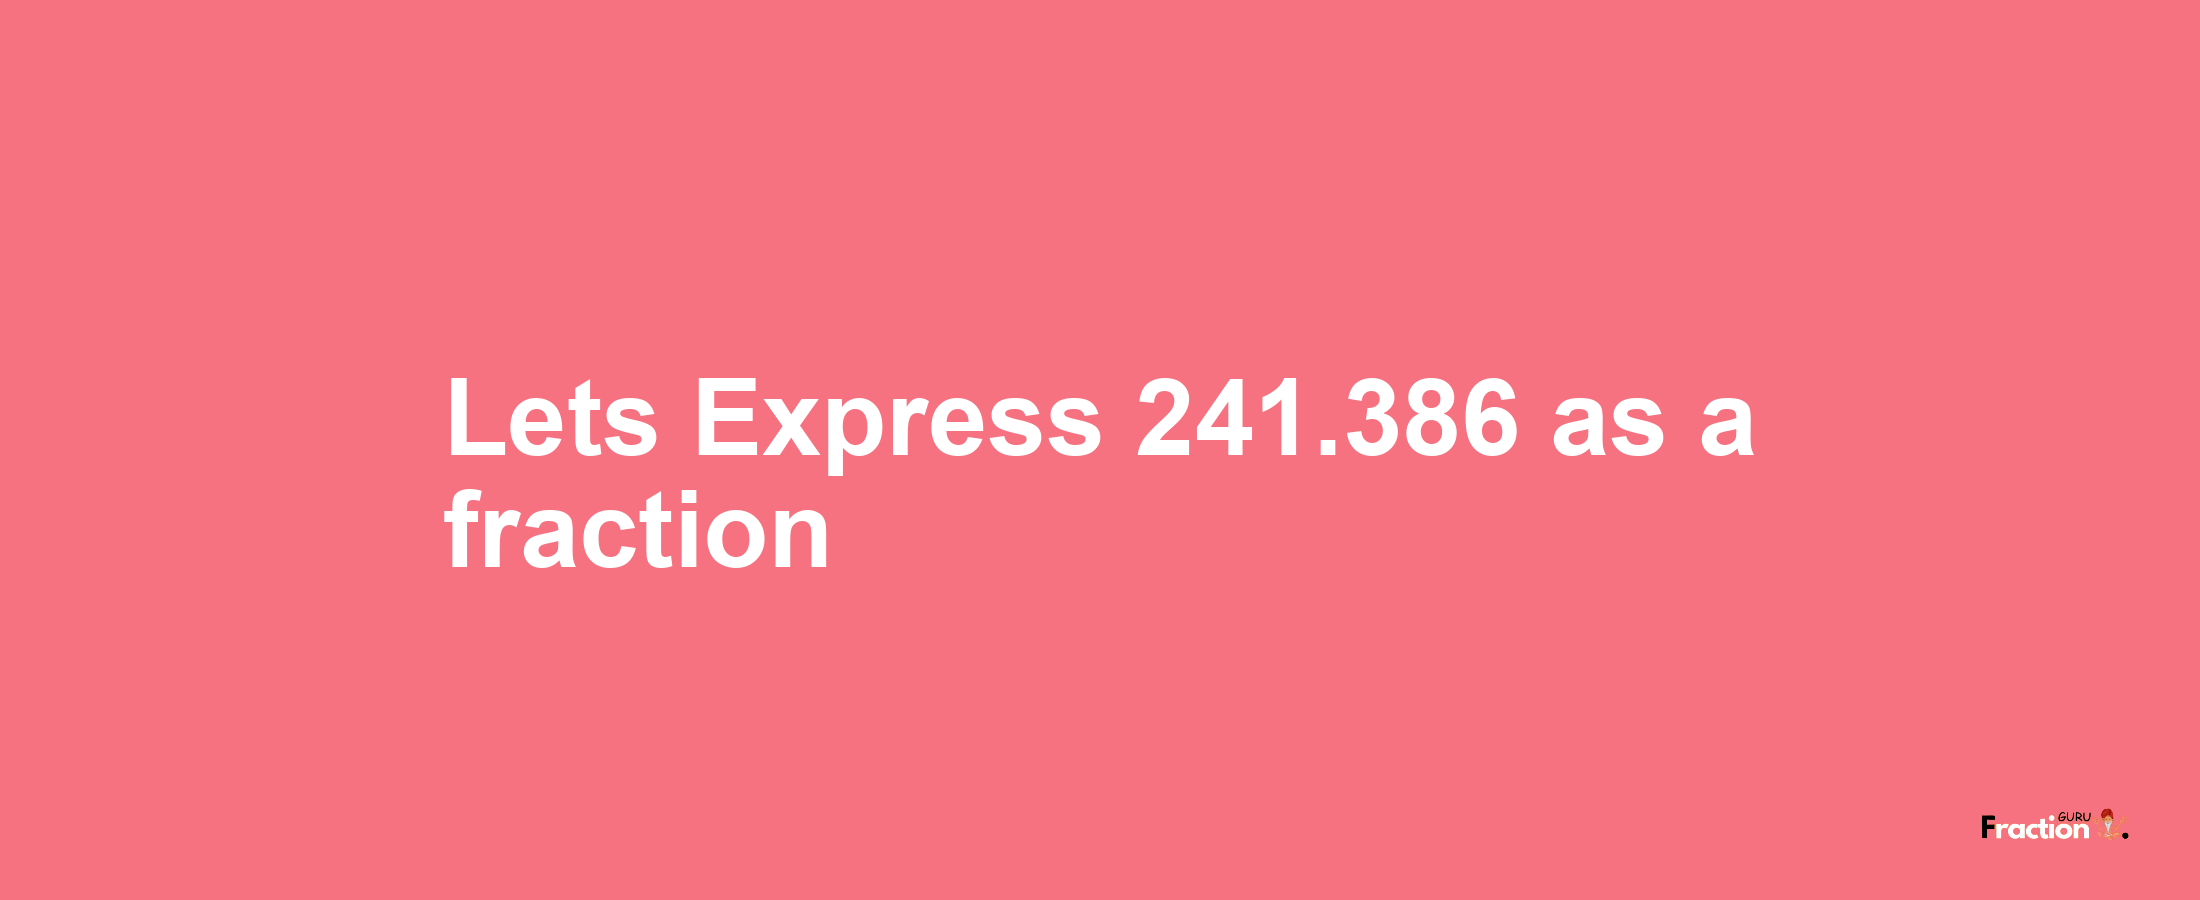 Lets Express 241.386 as afraction